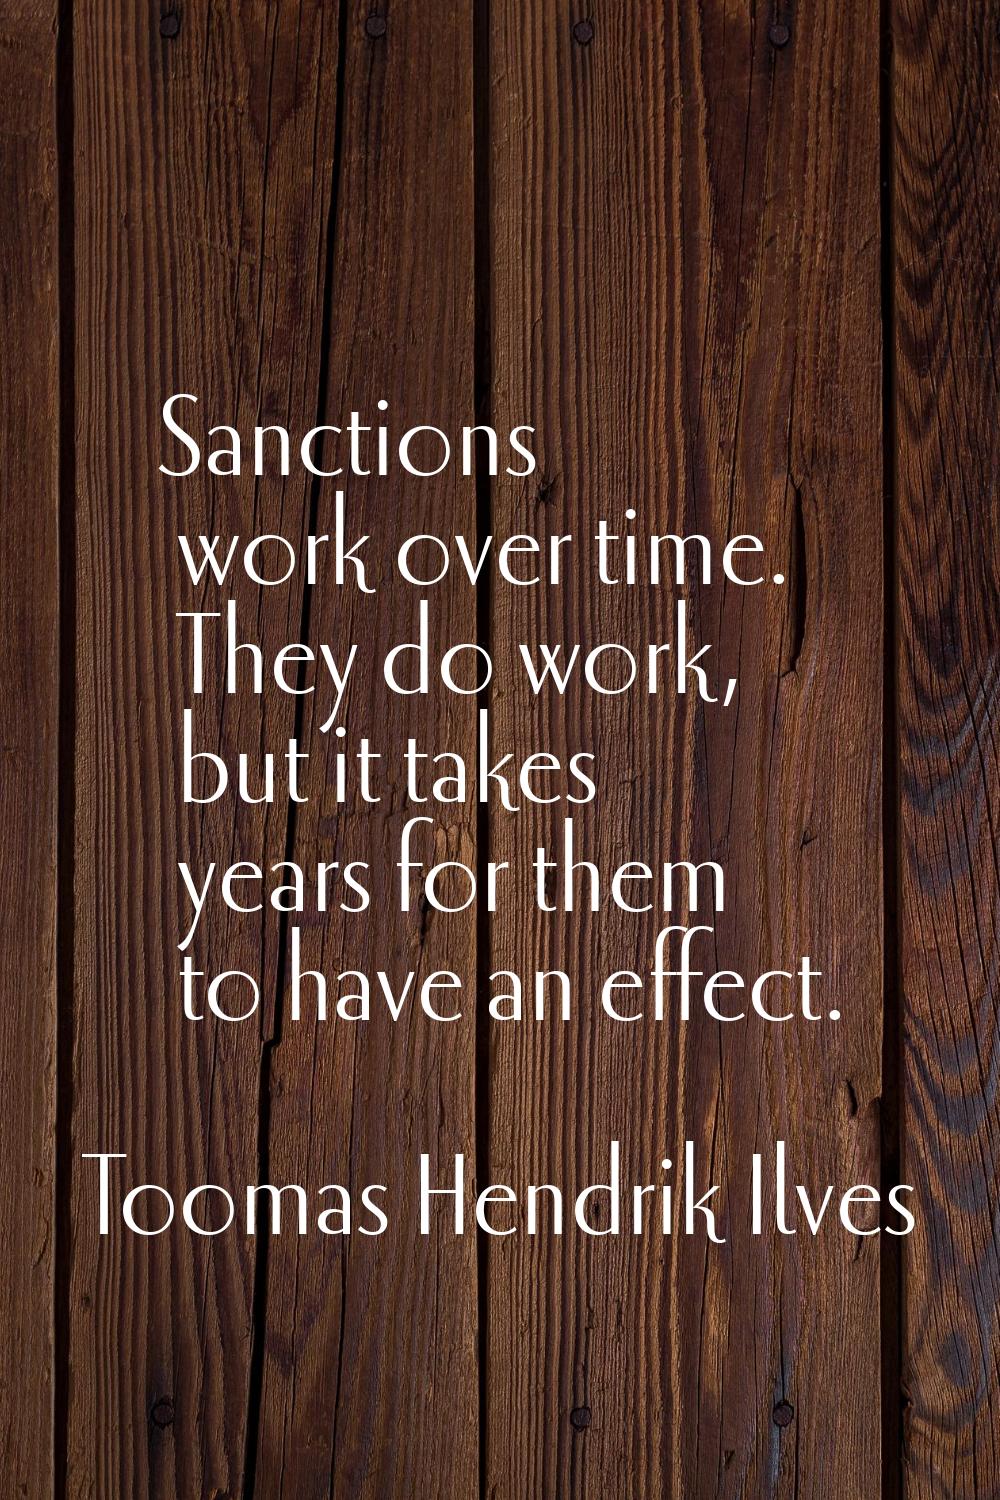 Sanctions work over time. They do work, but it takes years for them to have an effect.